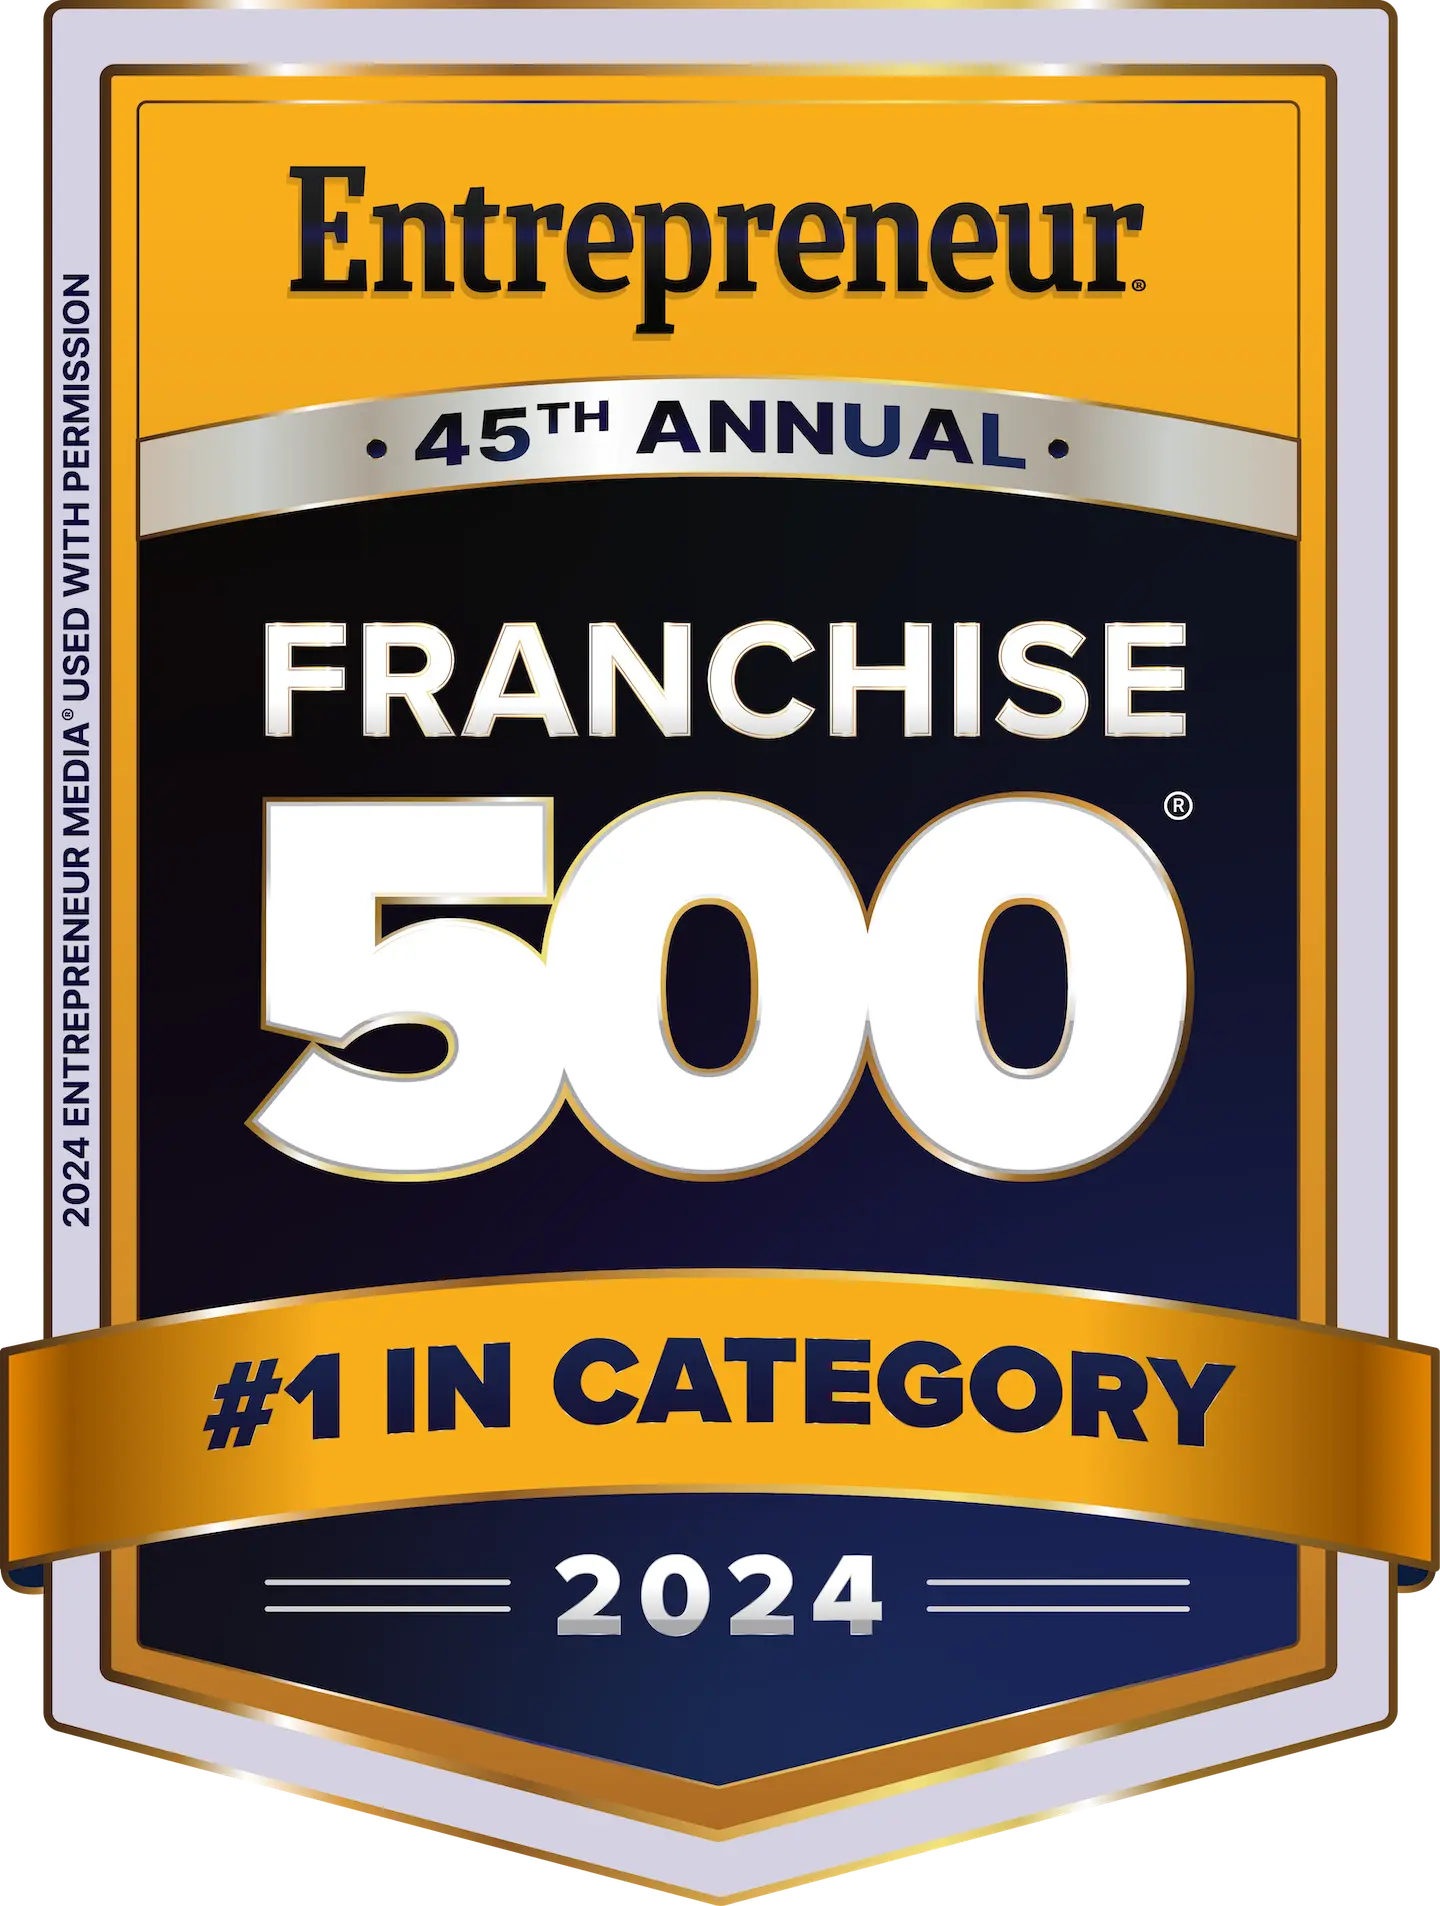 Two-toned black badge with yellow text reading 'Entrepreneur; Franchise 500; Ranked number 1 in category; 2024'.